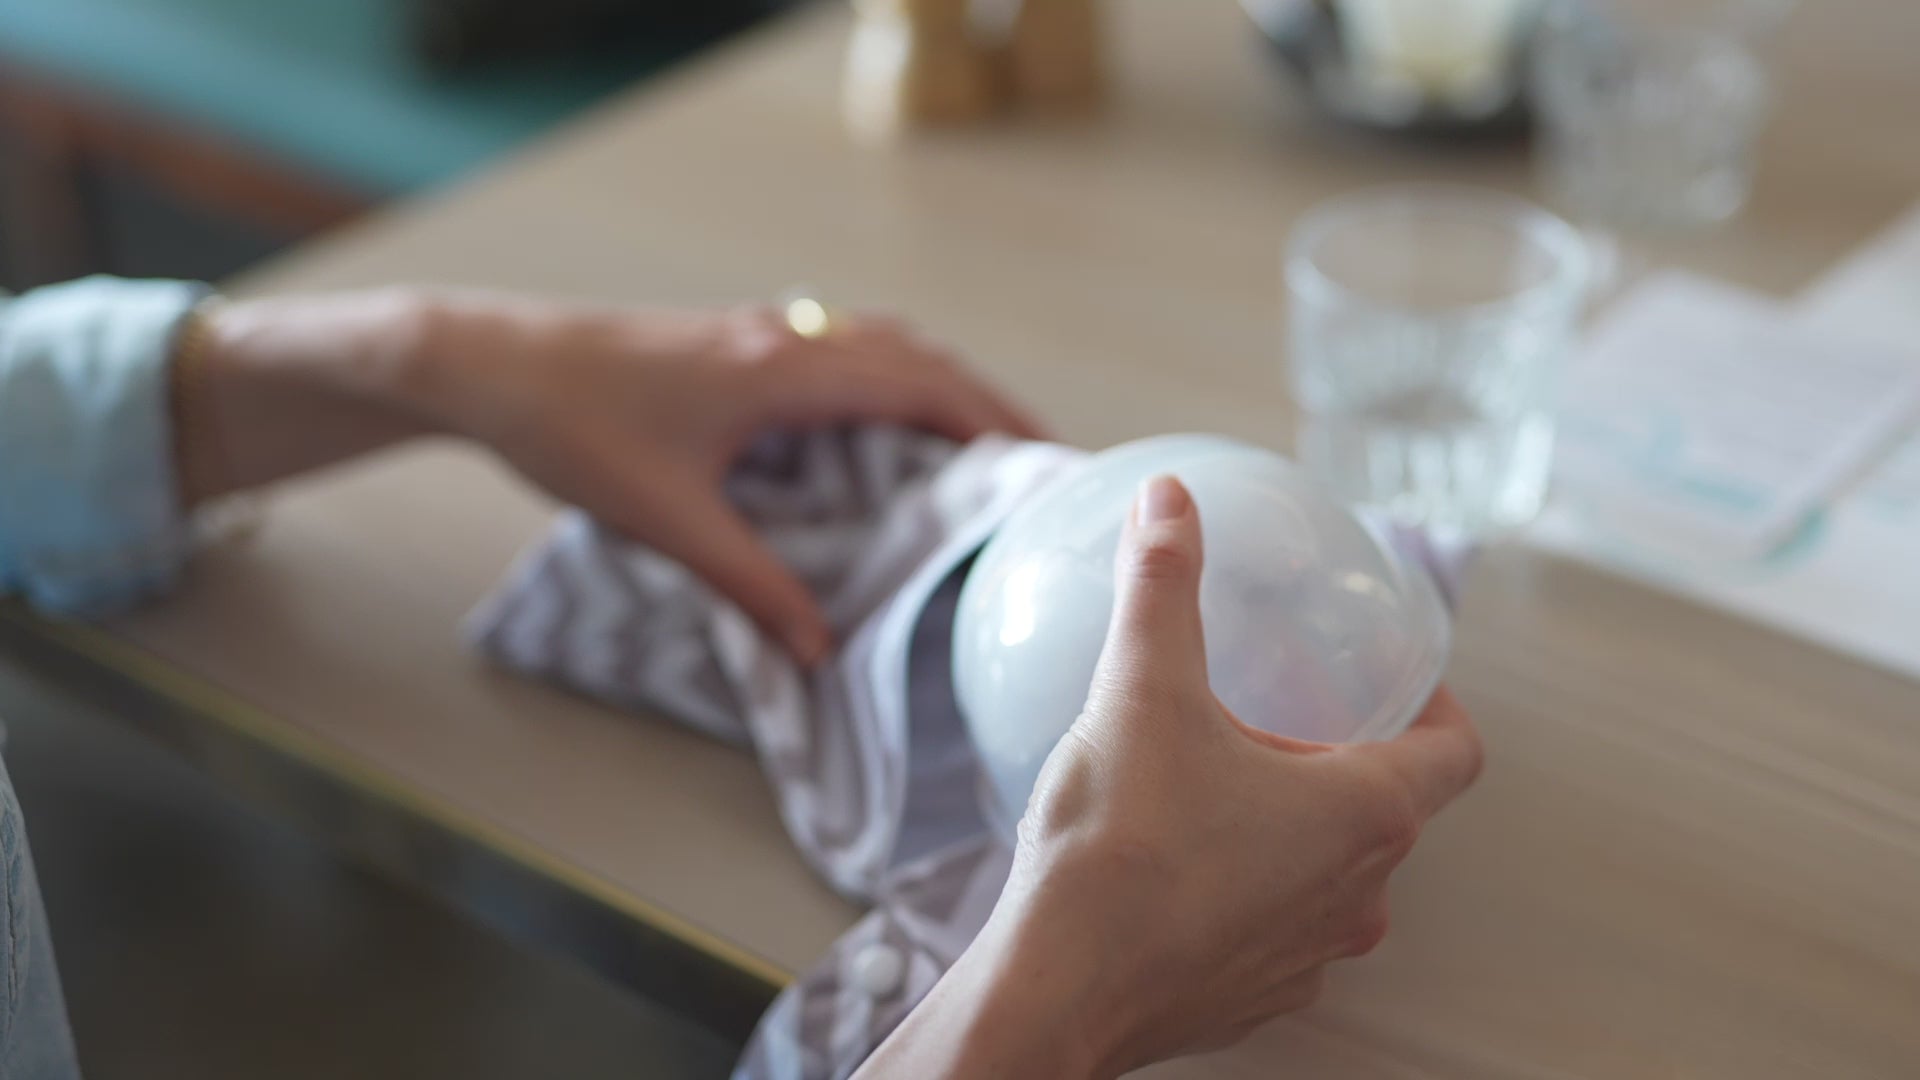 Bubka Move Double Electric Wearable Breast Pump is discreet, quiet and anatomically shaped breast pump designed to move with you. There is only 4 easy-to-assemble parts. Save time instantly & experience discreet, hands-free, hospital-grade pumping performance.